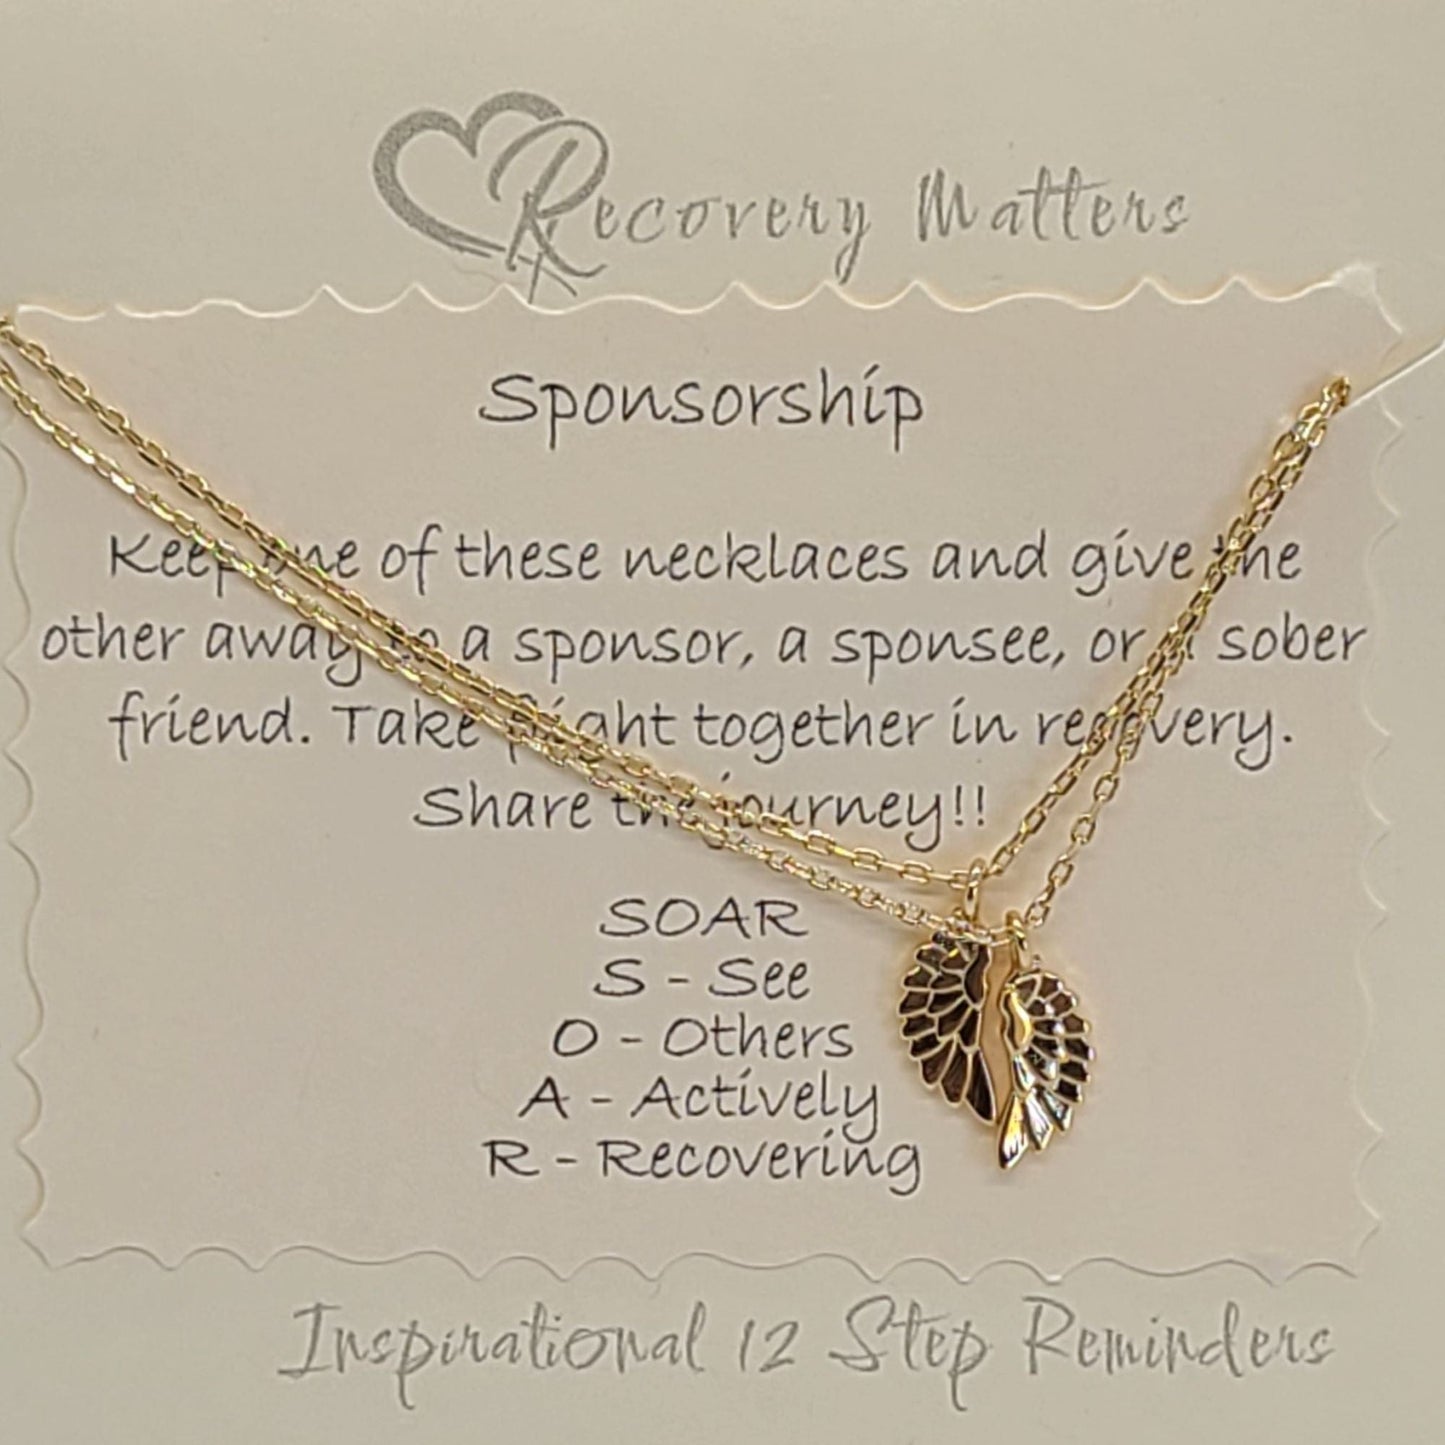 Sponsorship Necklace by Recovery Matters